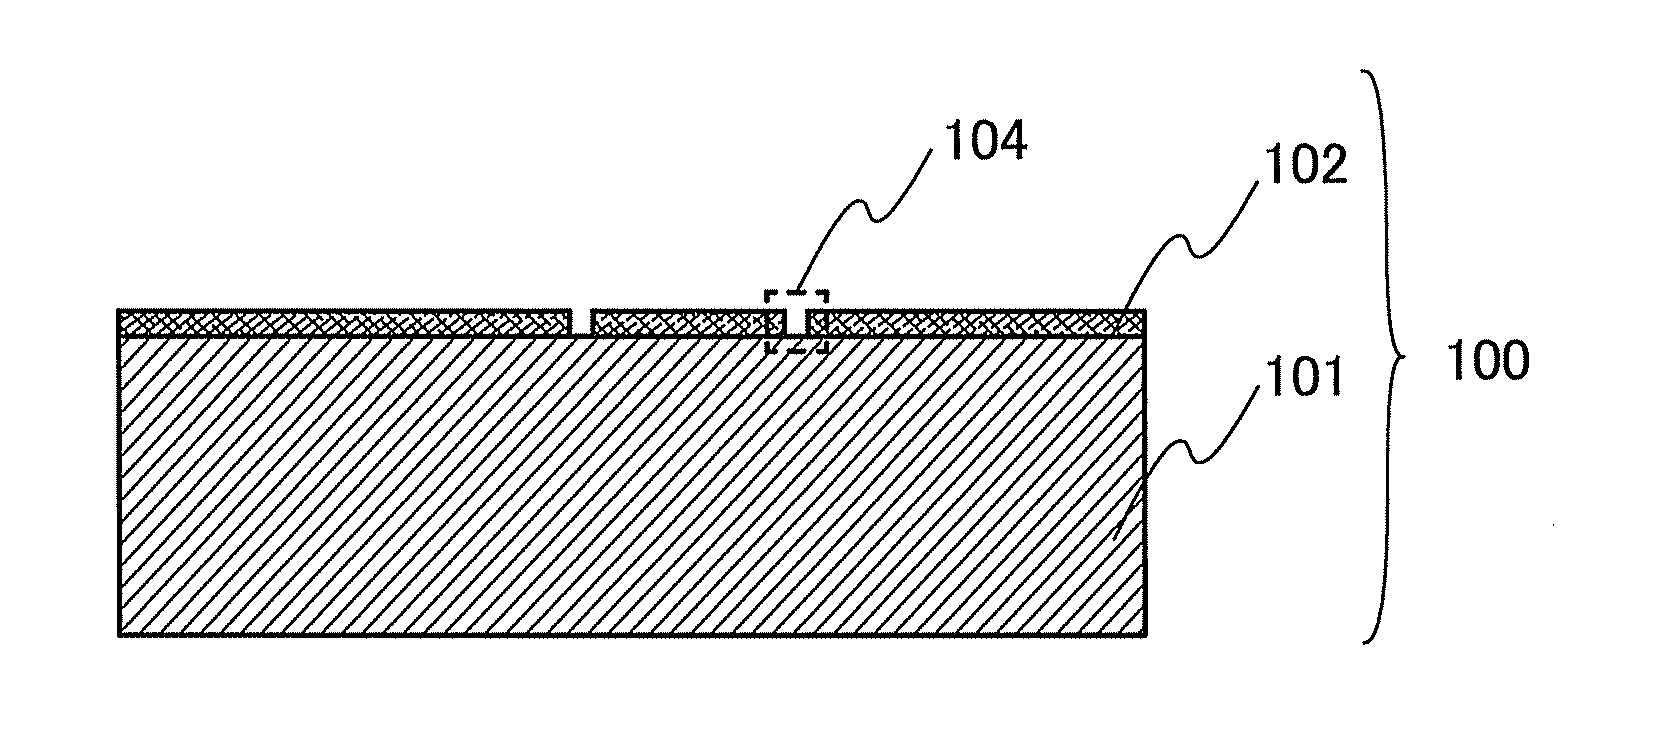 Positive-electrode active material and power storage device